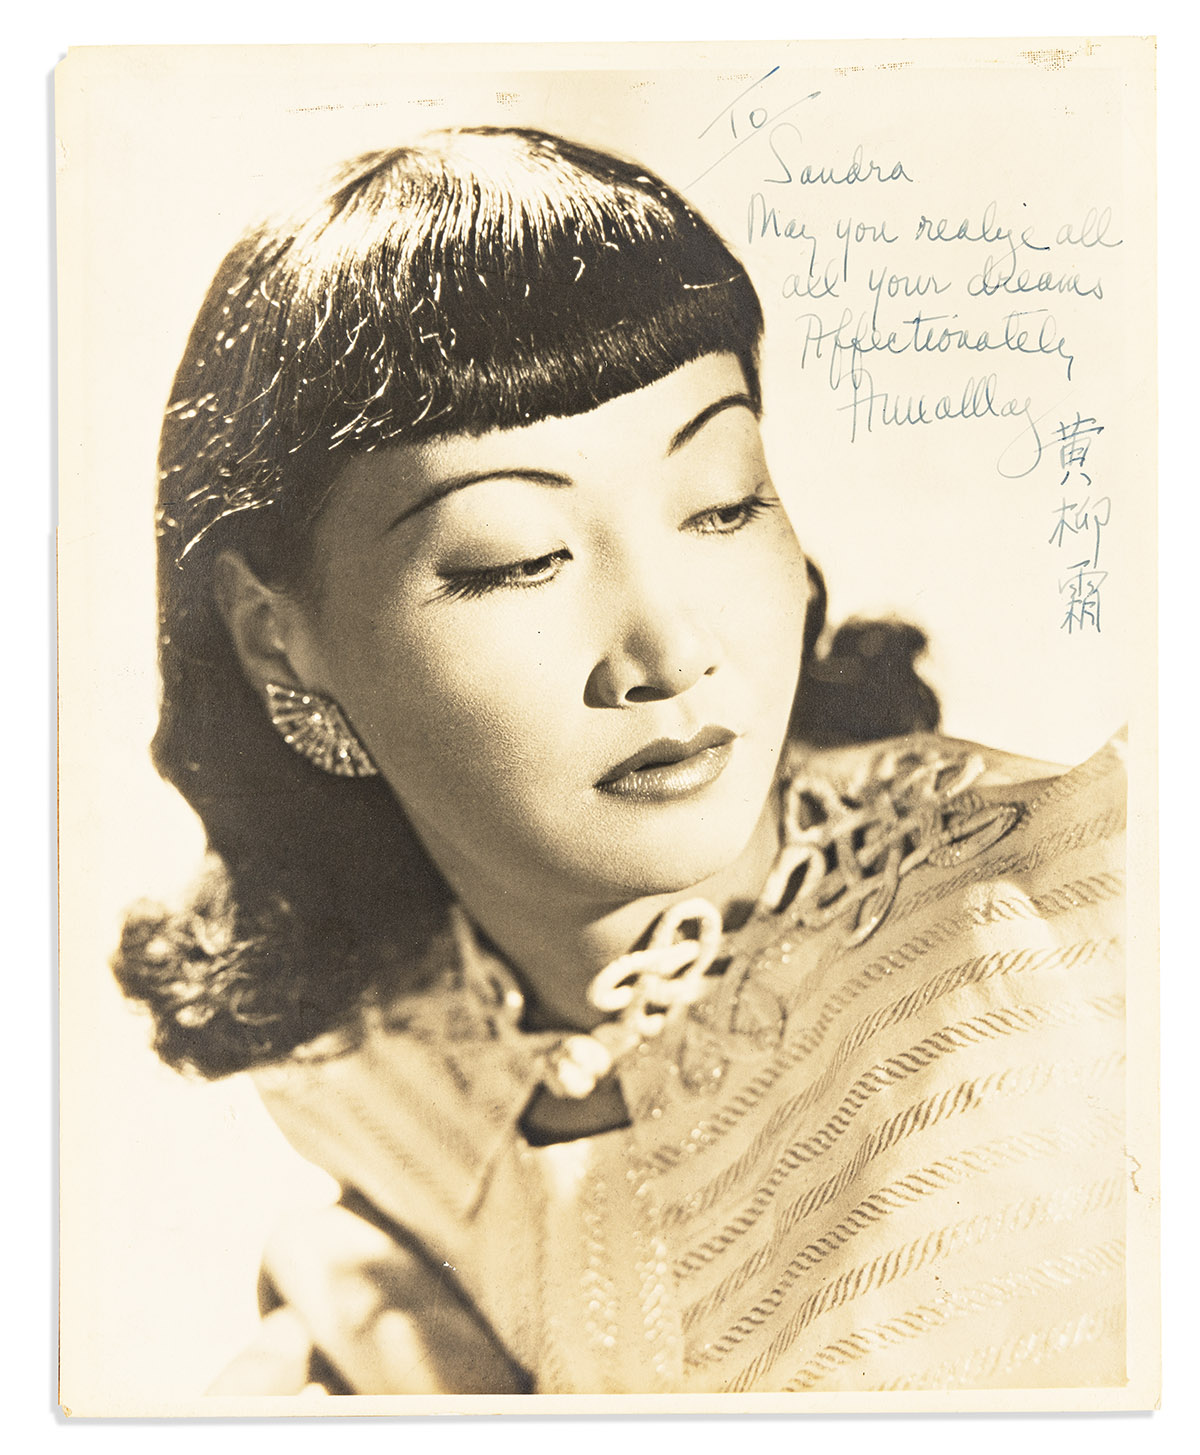 WONG, ANNA MAY. Photograph Signed and Inscribed, To / Sandra / May you realize all / all [sic] your dreams / Affectionately / AnnaMay